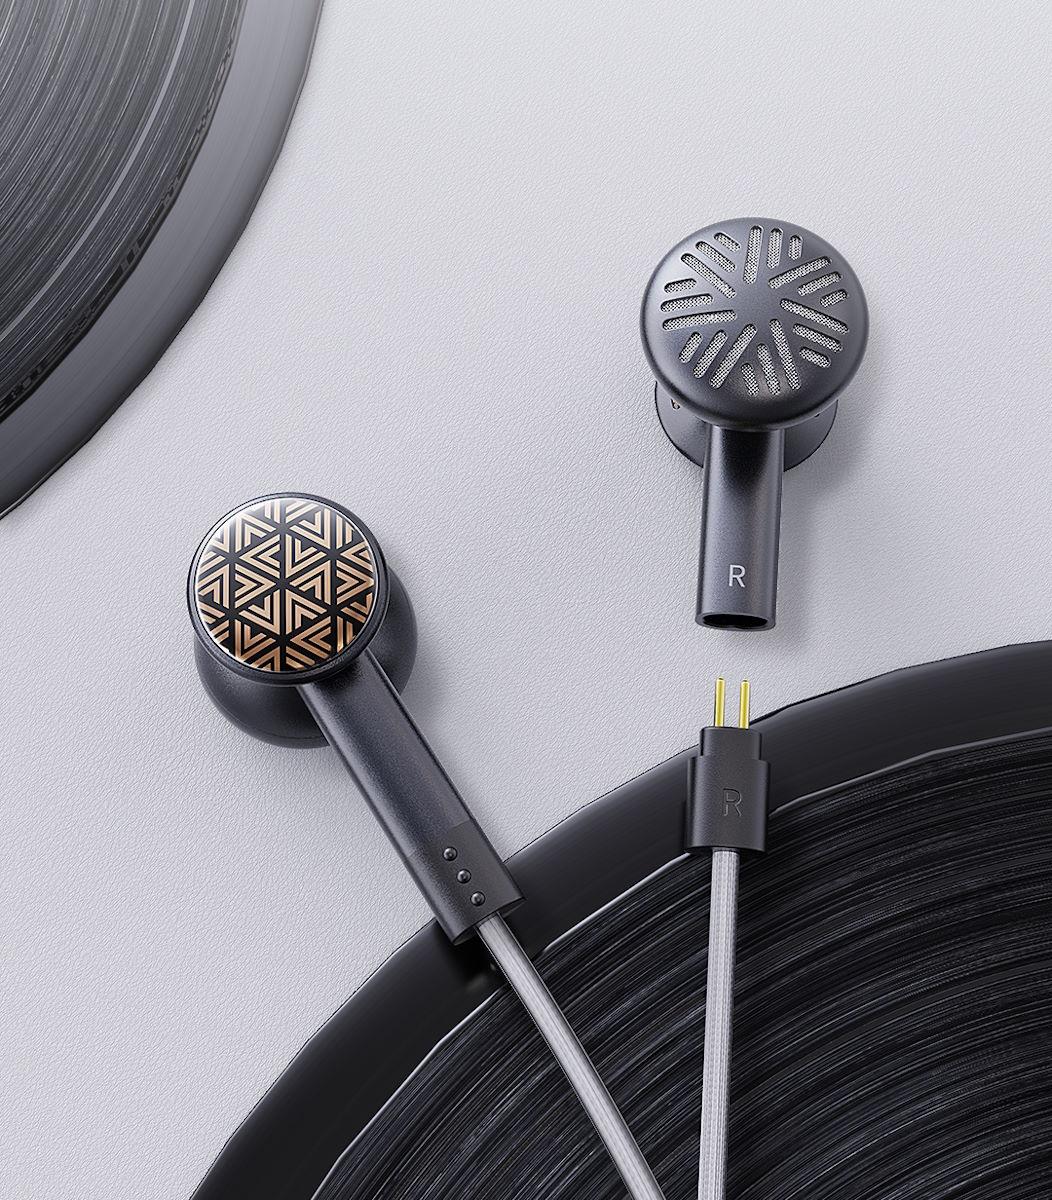 FiiO FF3S Earbud Is Officially Released